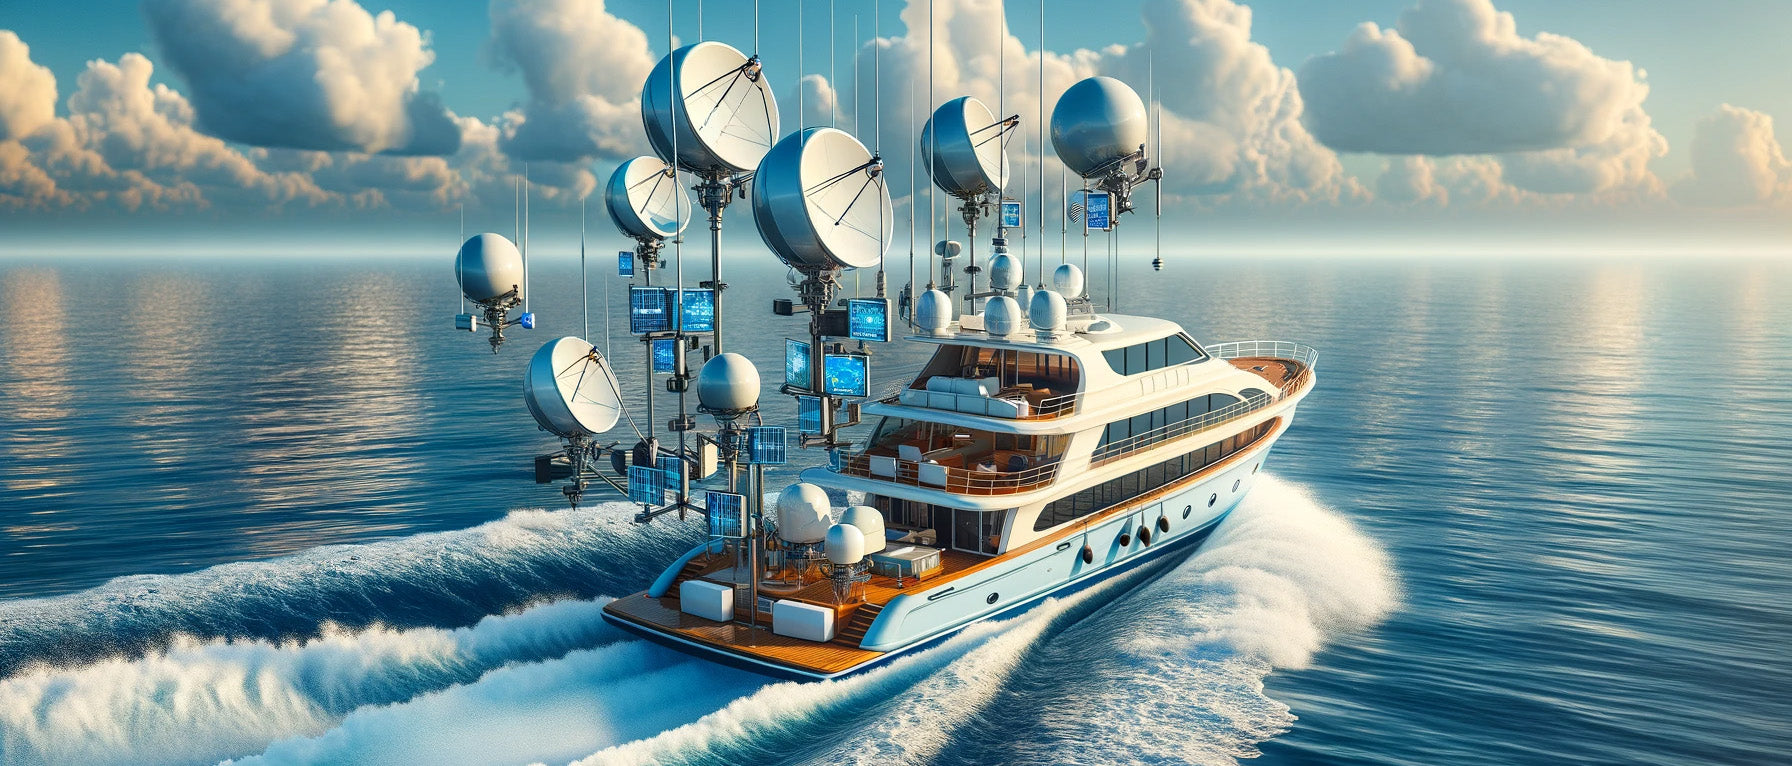 Leisure Boating and Satellite Networks